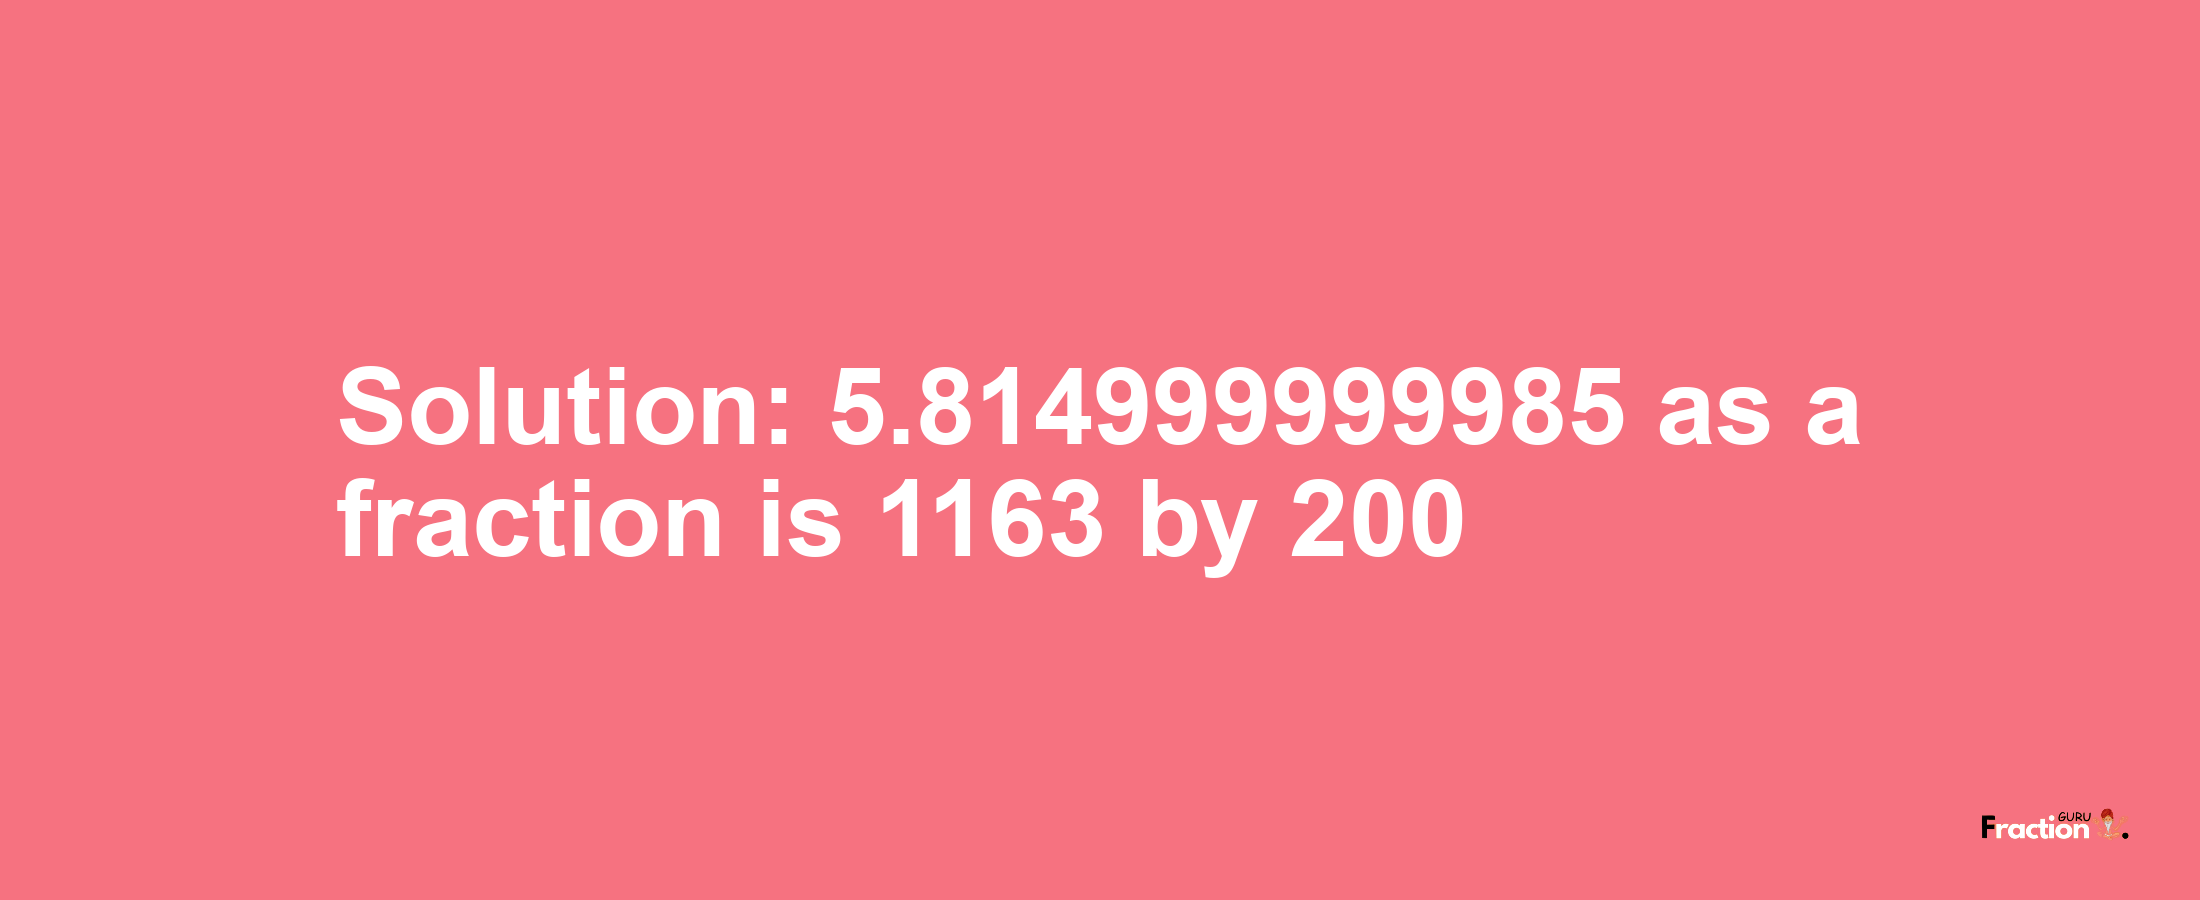 Solution:5.814999999985 as a fraction is 1163/200